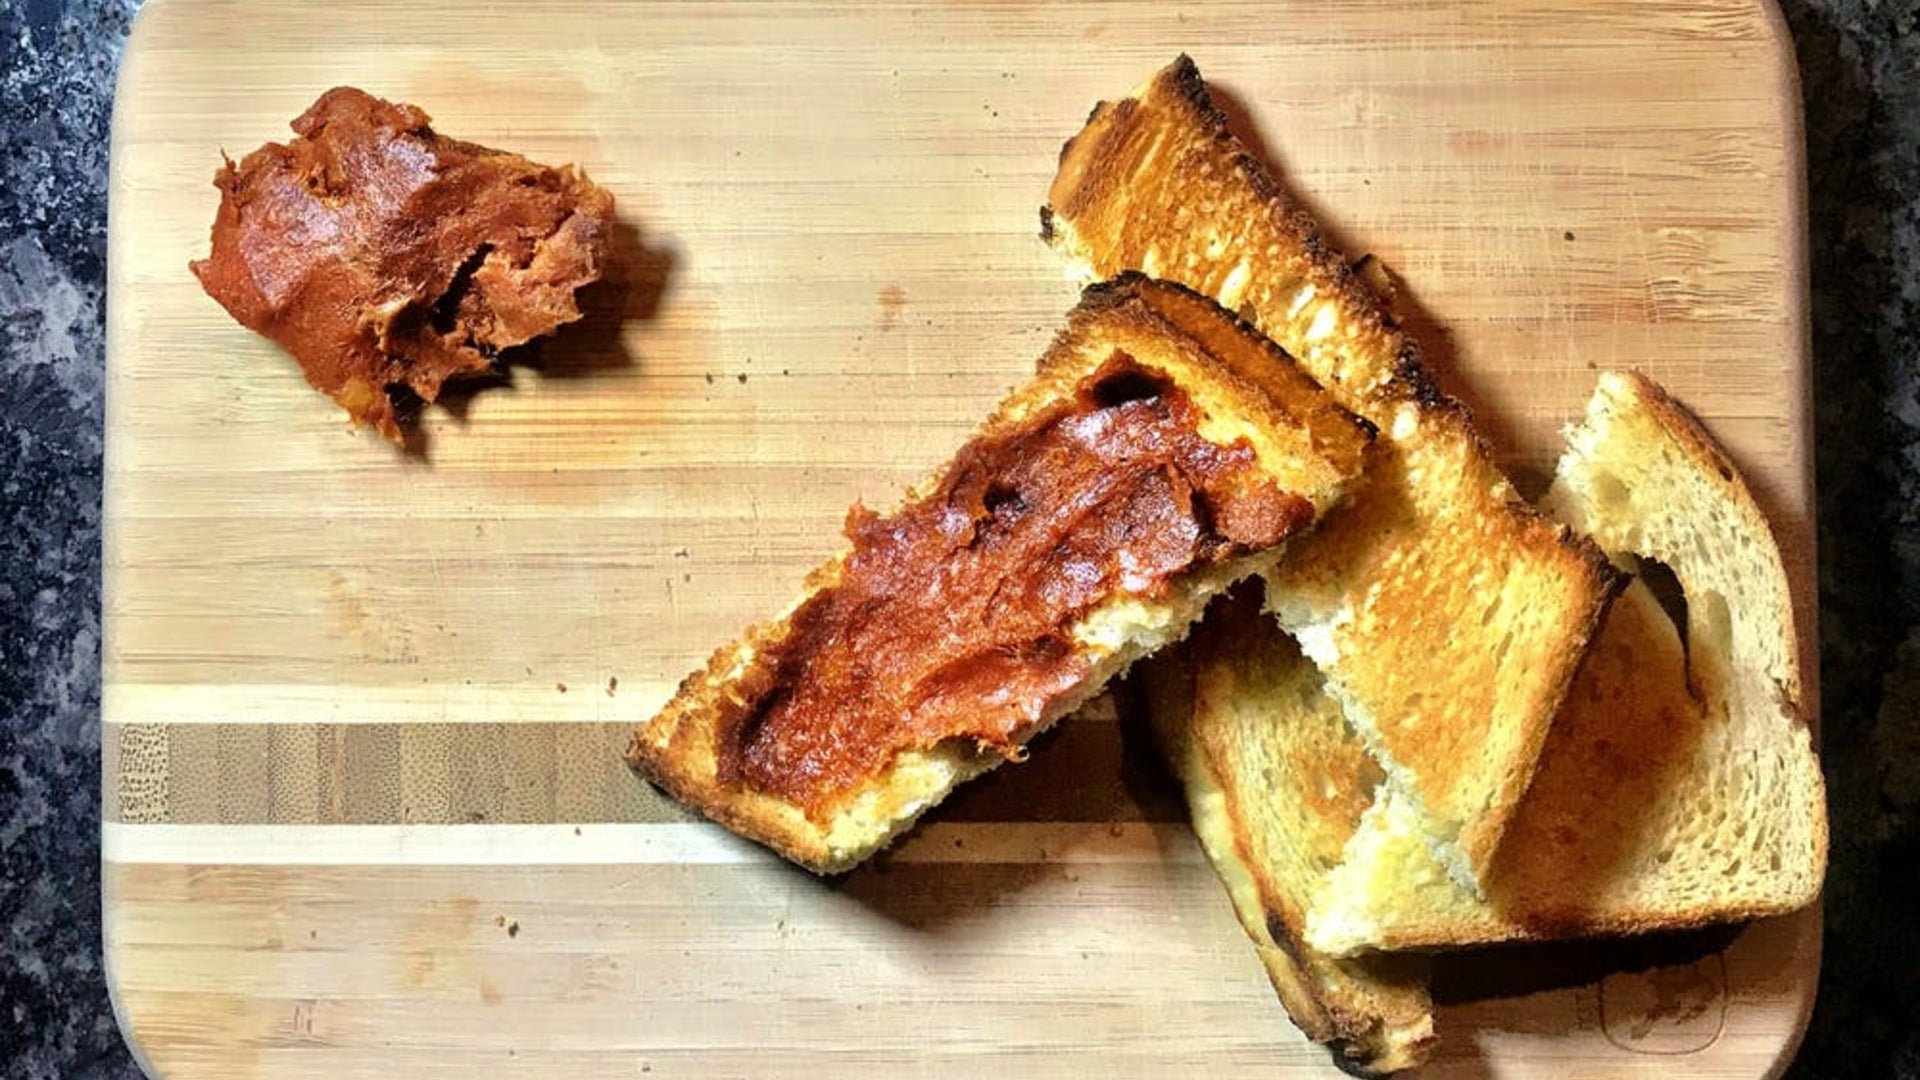 four pieces of crispy toasted bread on a cutting board with 'nduja spread on one piece.